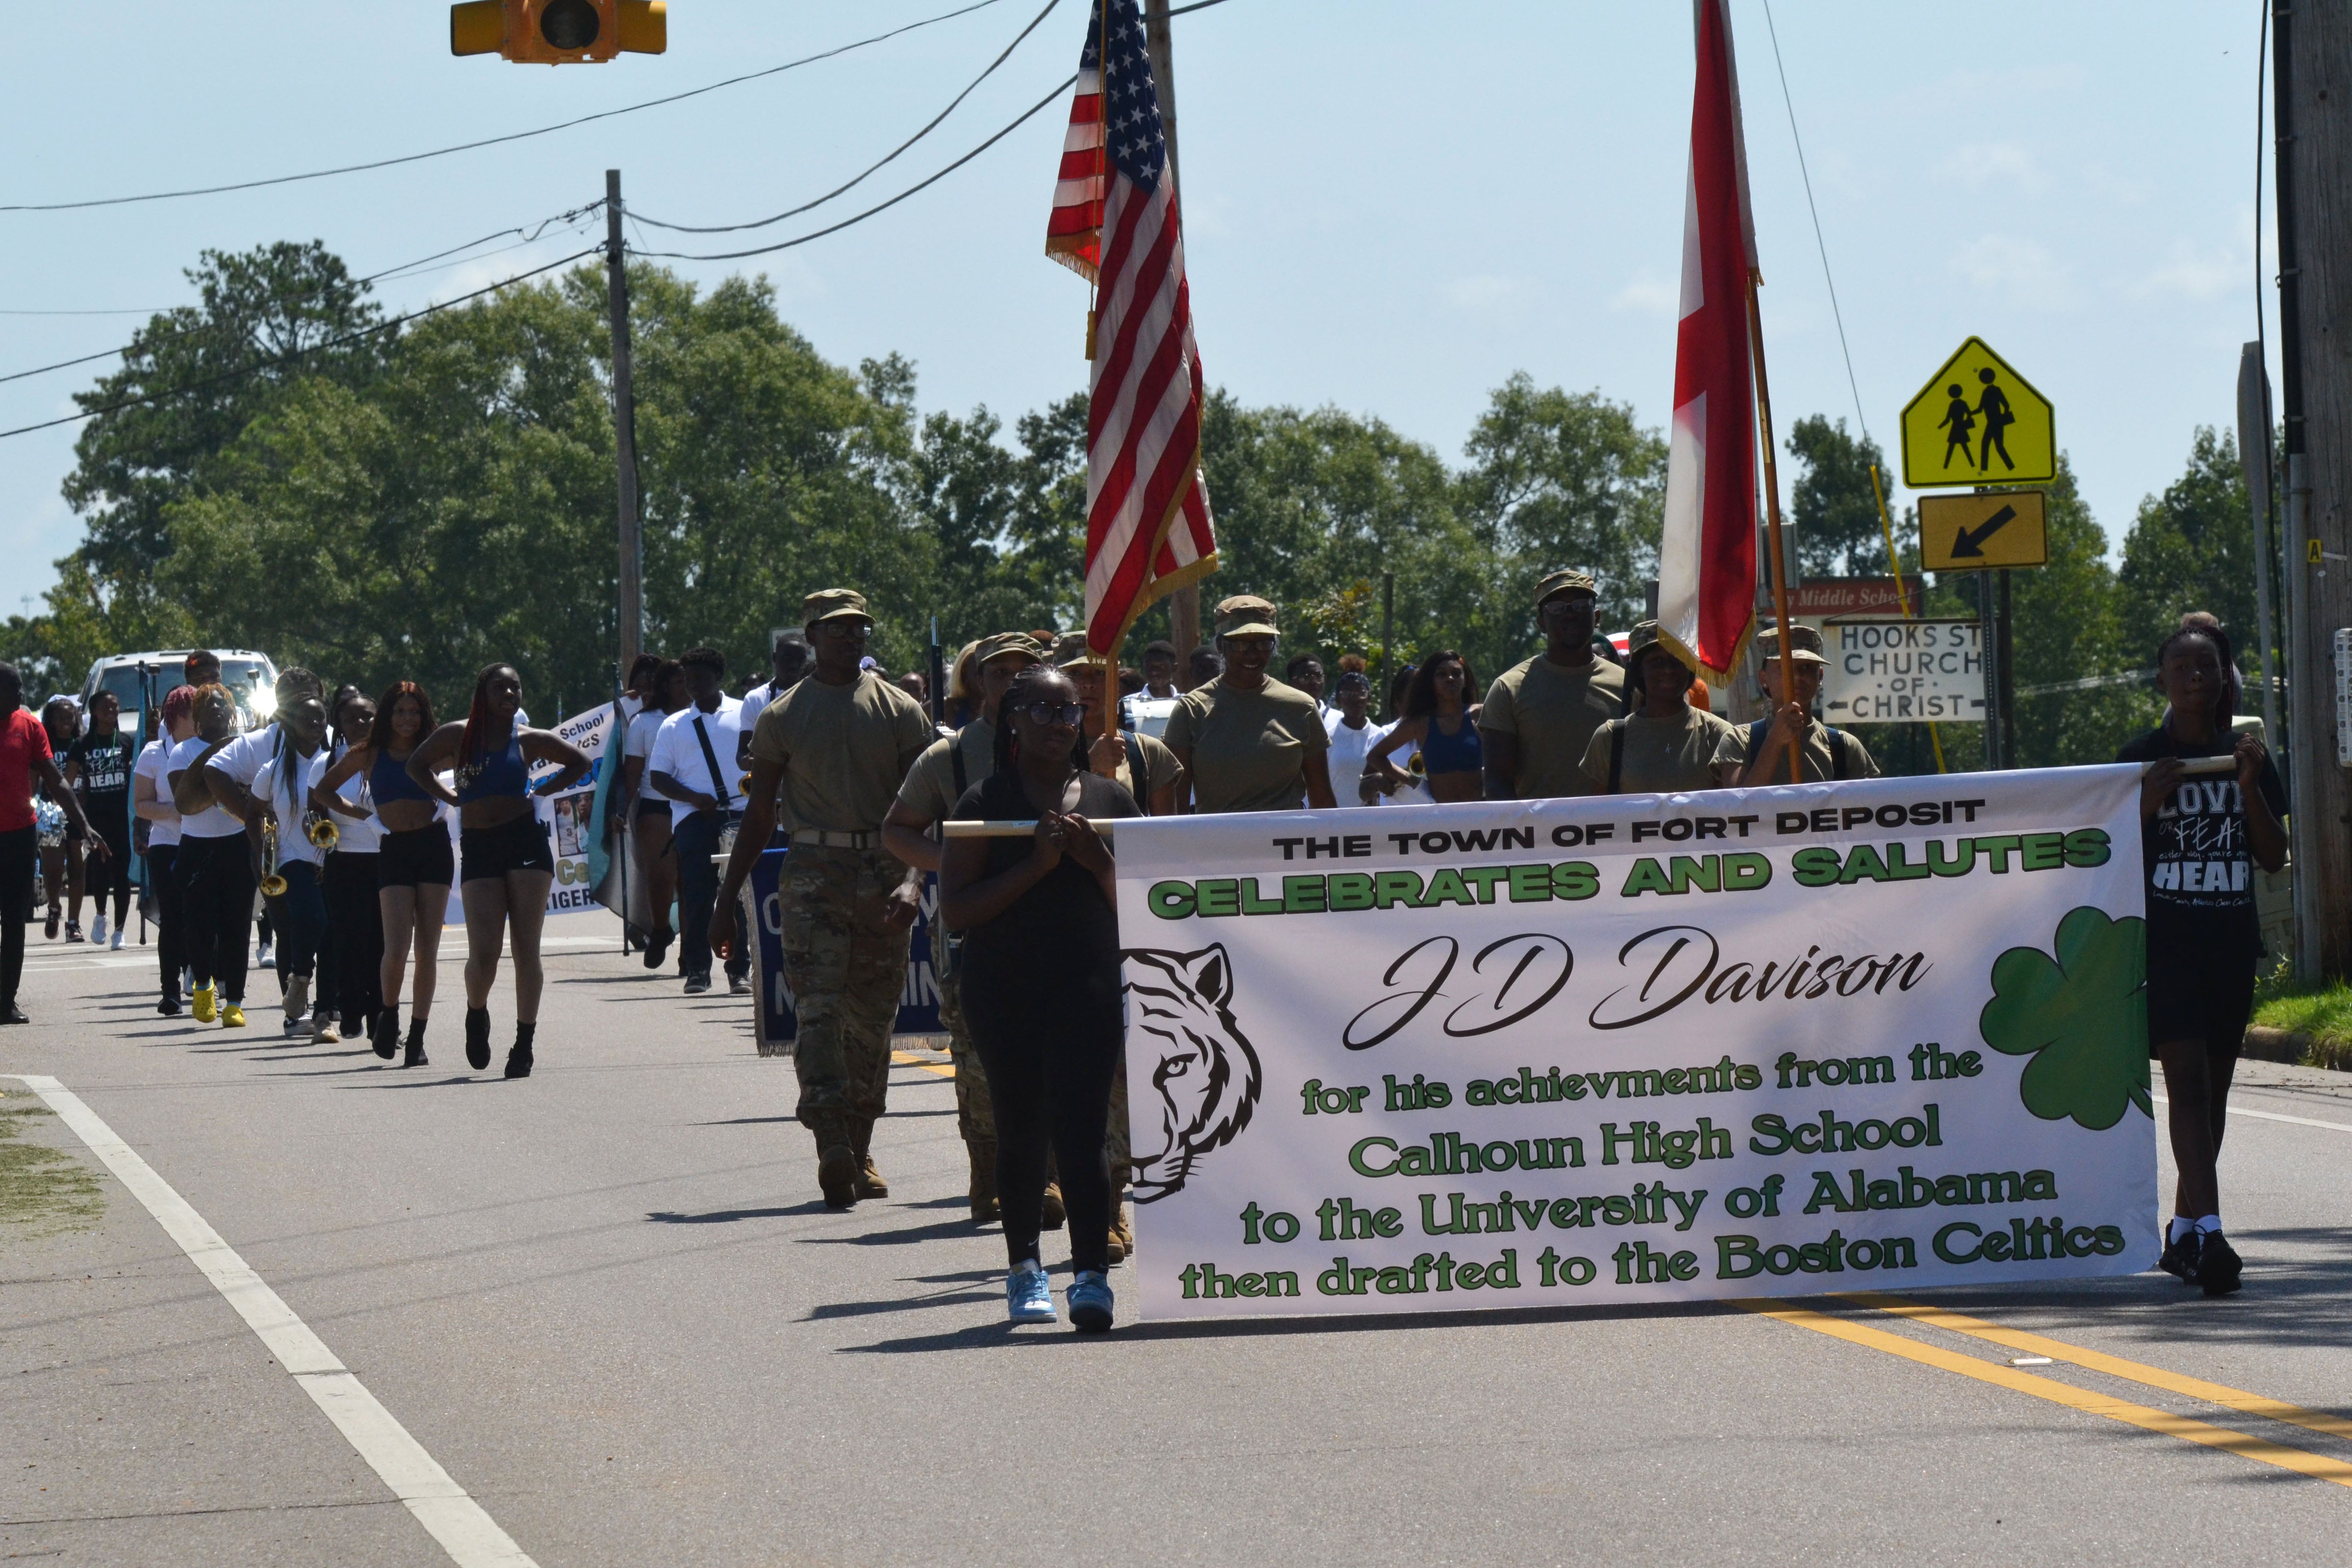 JD Davison participates in parade, gives back to Fort Deposit via  meet-and-greet - Lowndes Signal